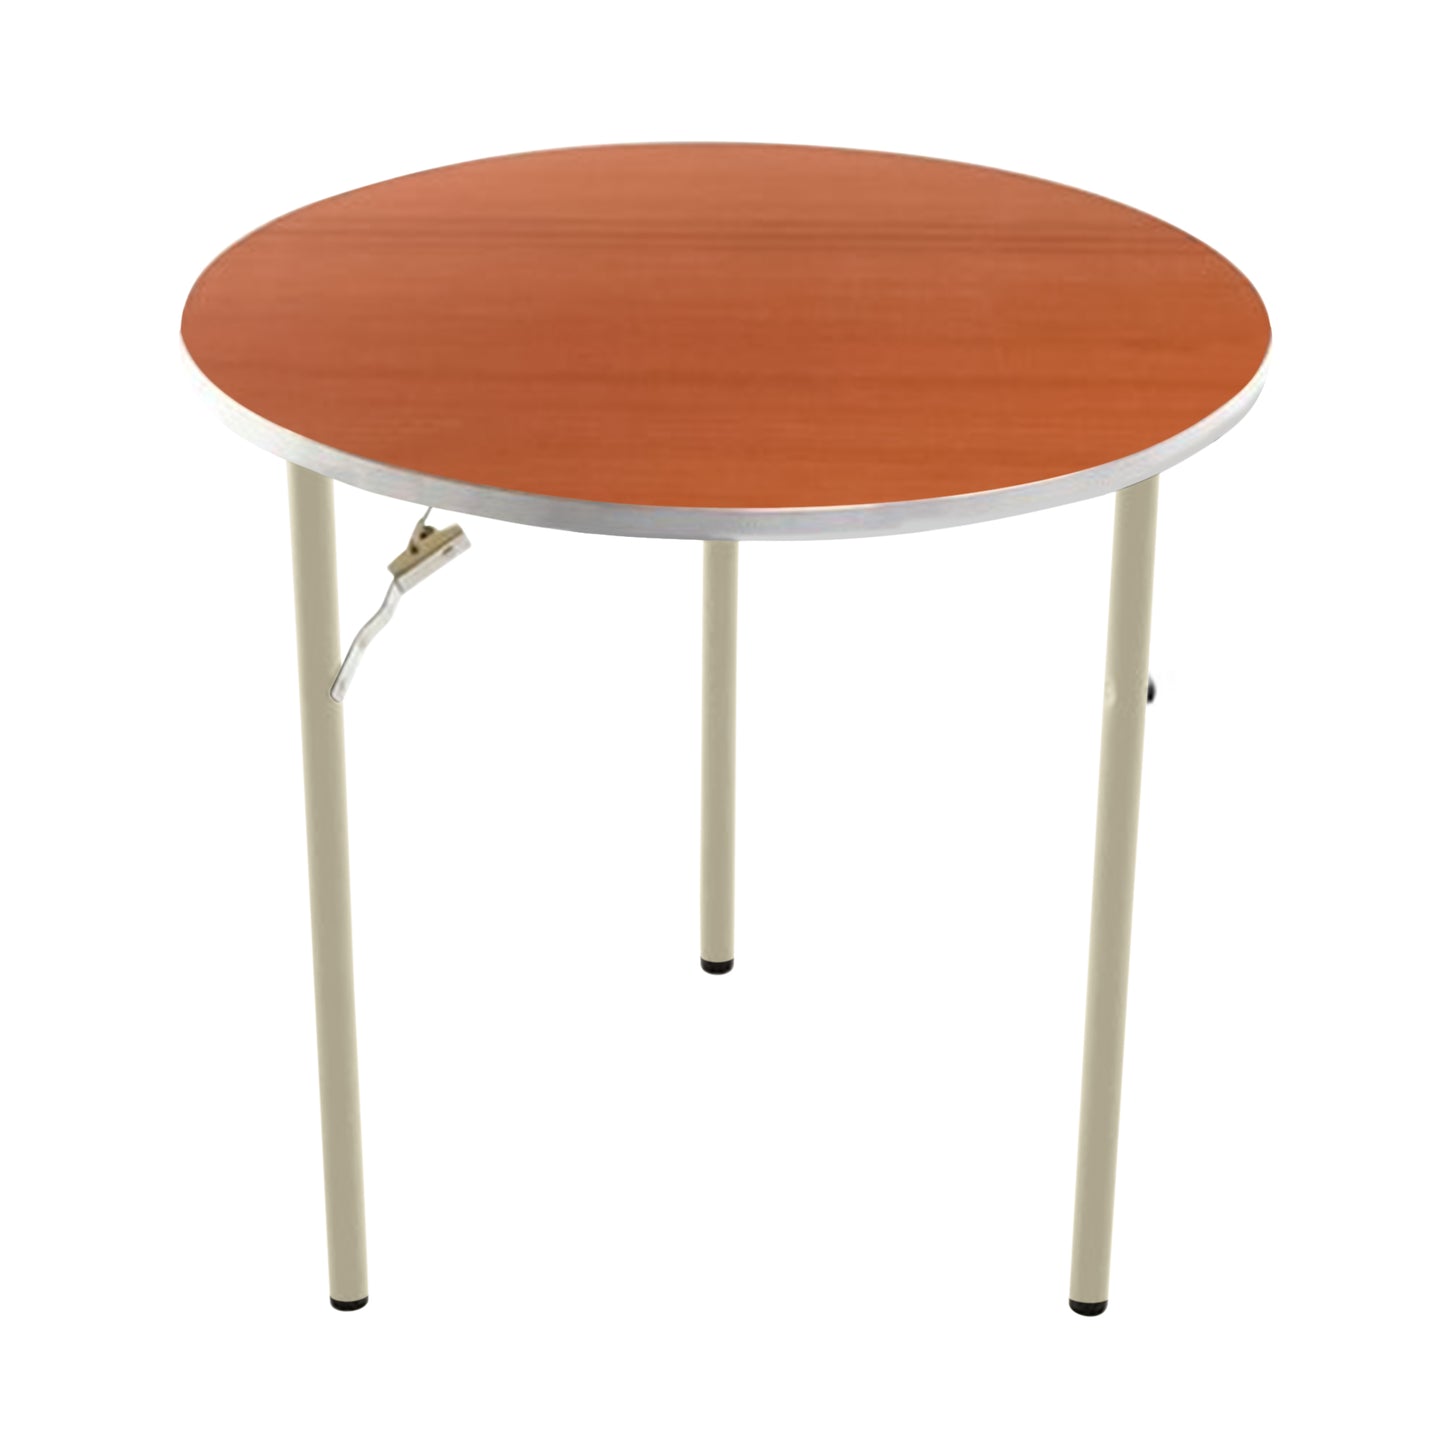 AmTab Folding Table - Plywood Stained and Sealed - Aluminum Edge - Round - 48" Diameter x 29"H  (AmTab AMT-R48PA)